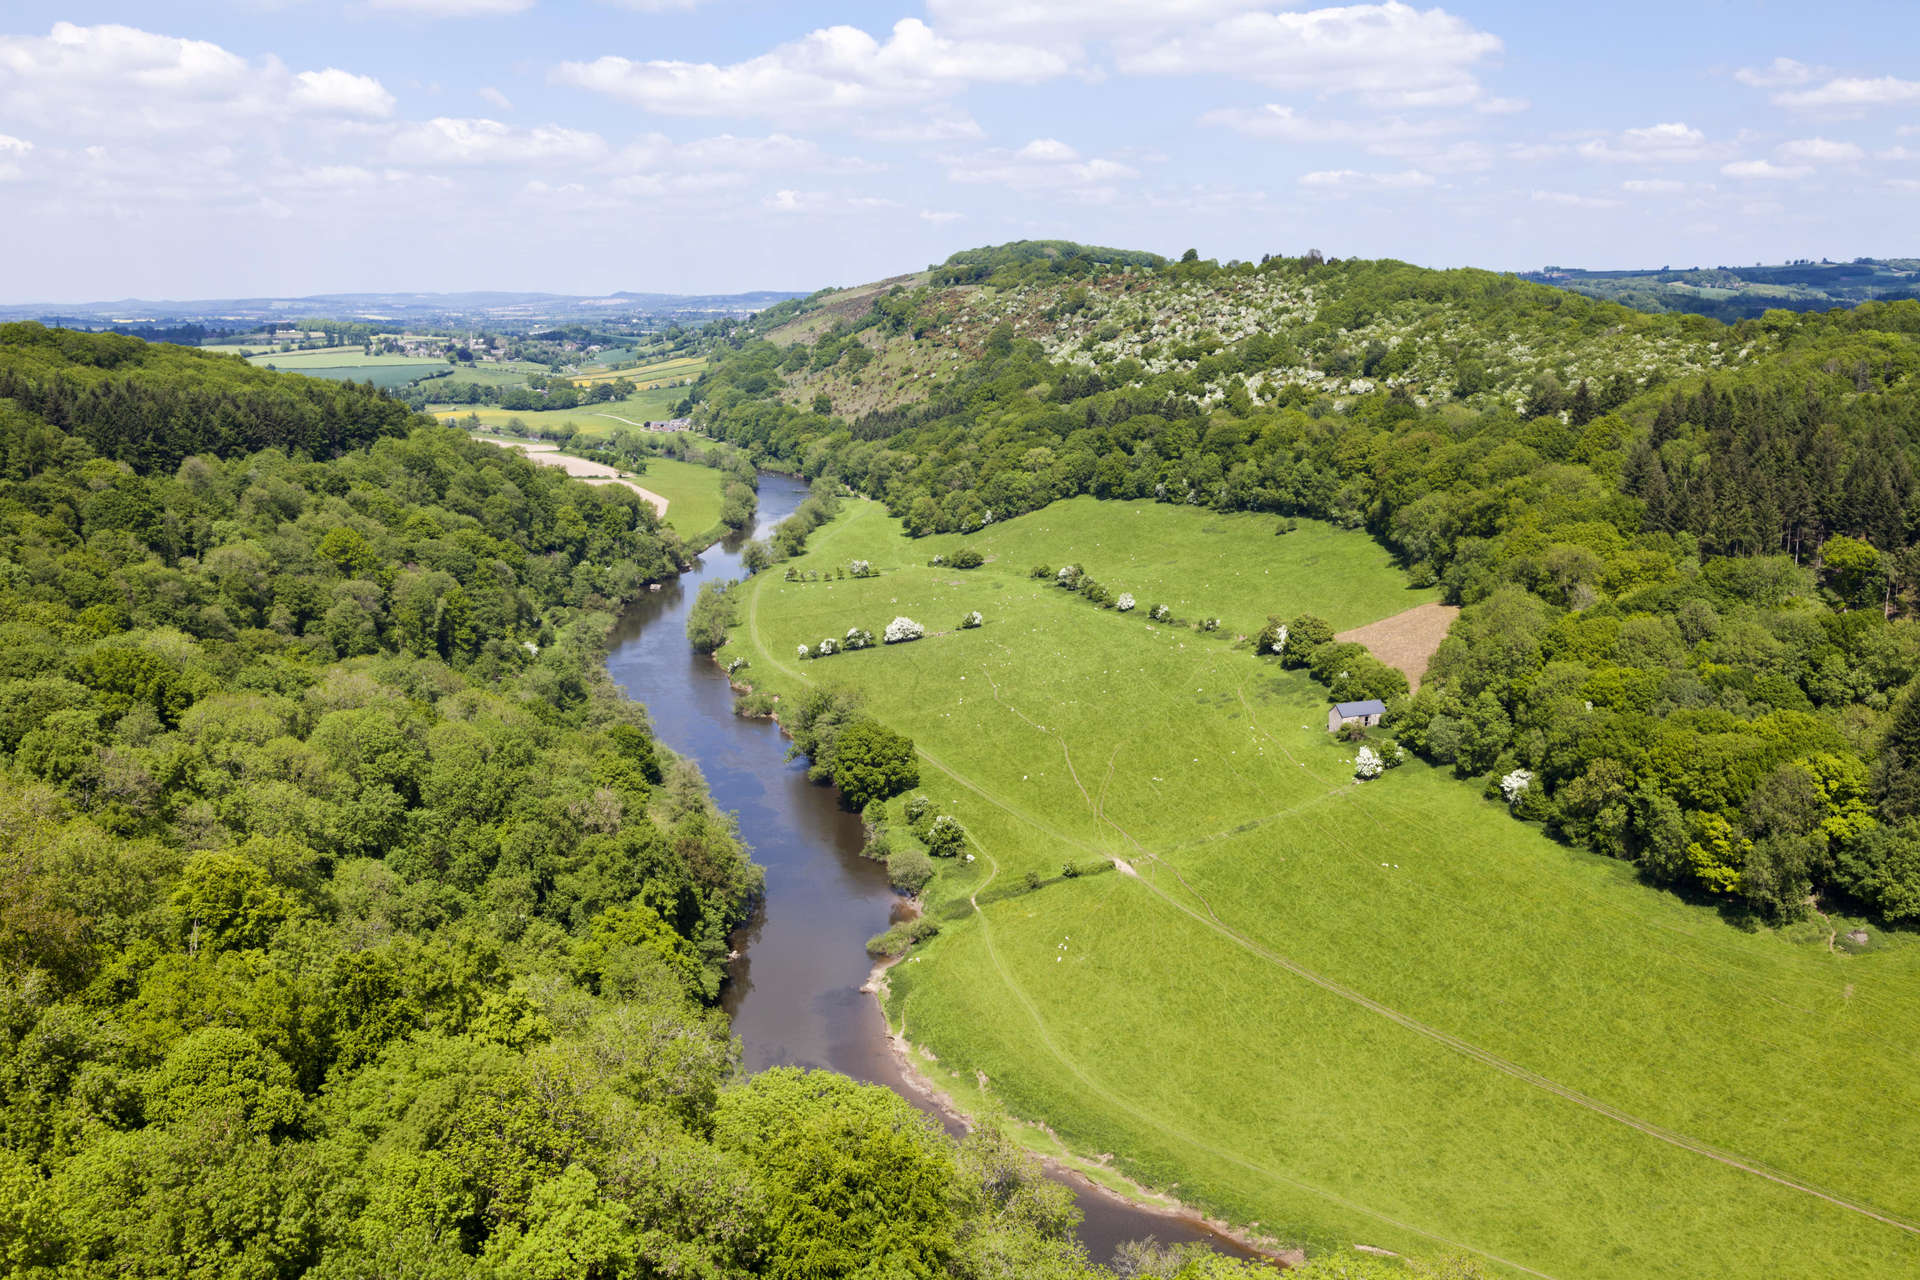 The view looking north down the River Wye towards Goodrich from the viewpoint on Symonds Yat Rock, Herefordshire UK